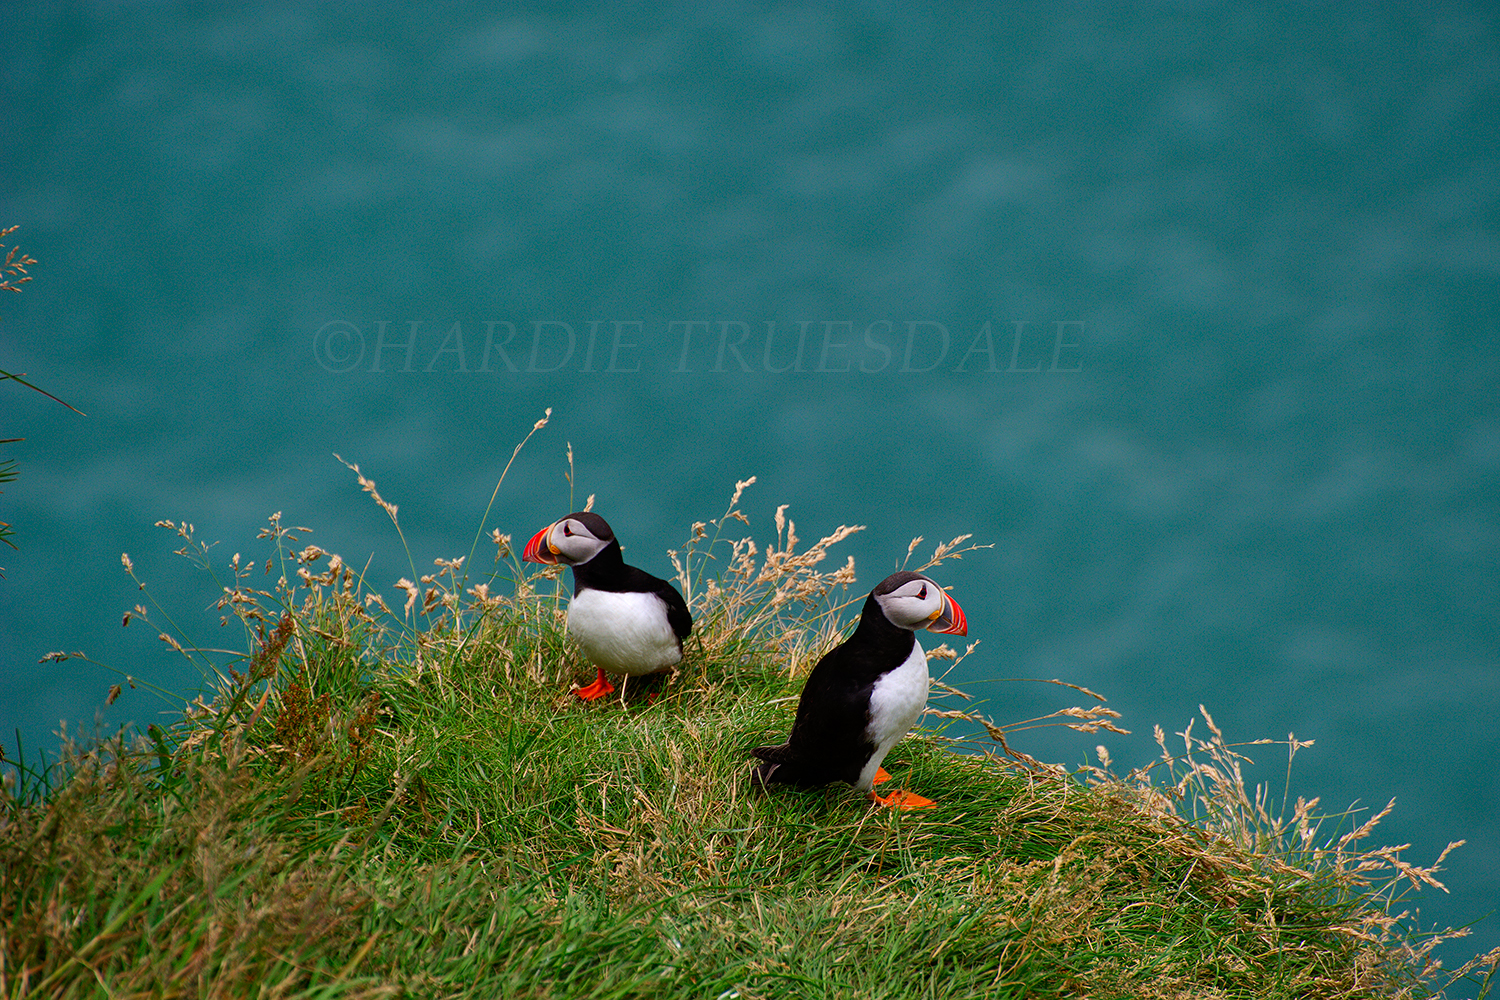  Ice#039 "Puffins", Iceland 